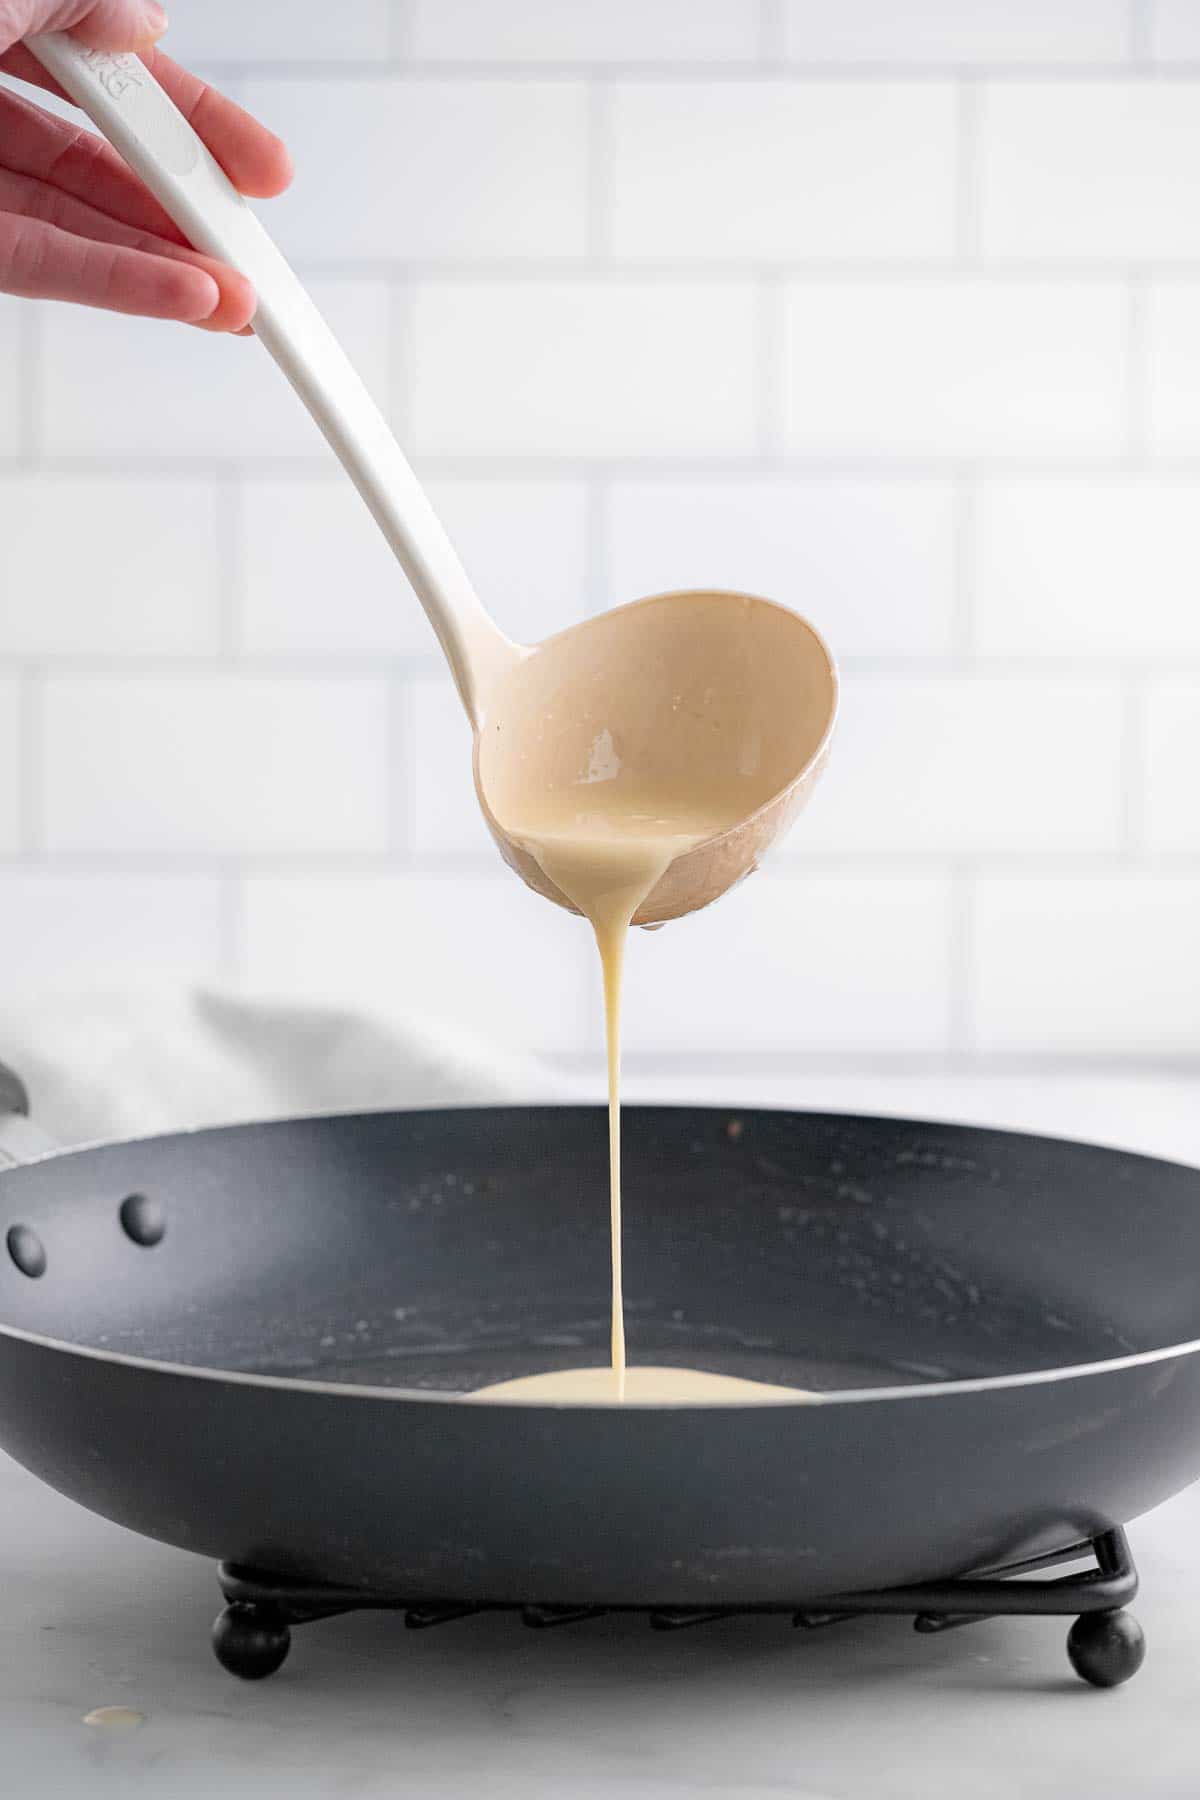 crepe batter being poured out of a white ladle into a black pan